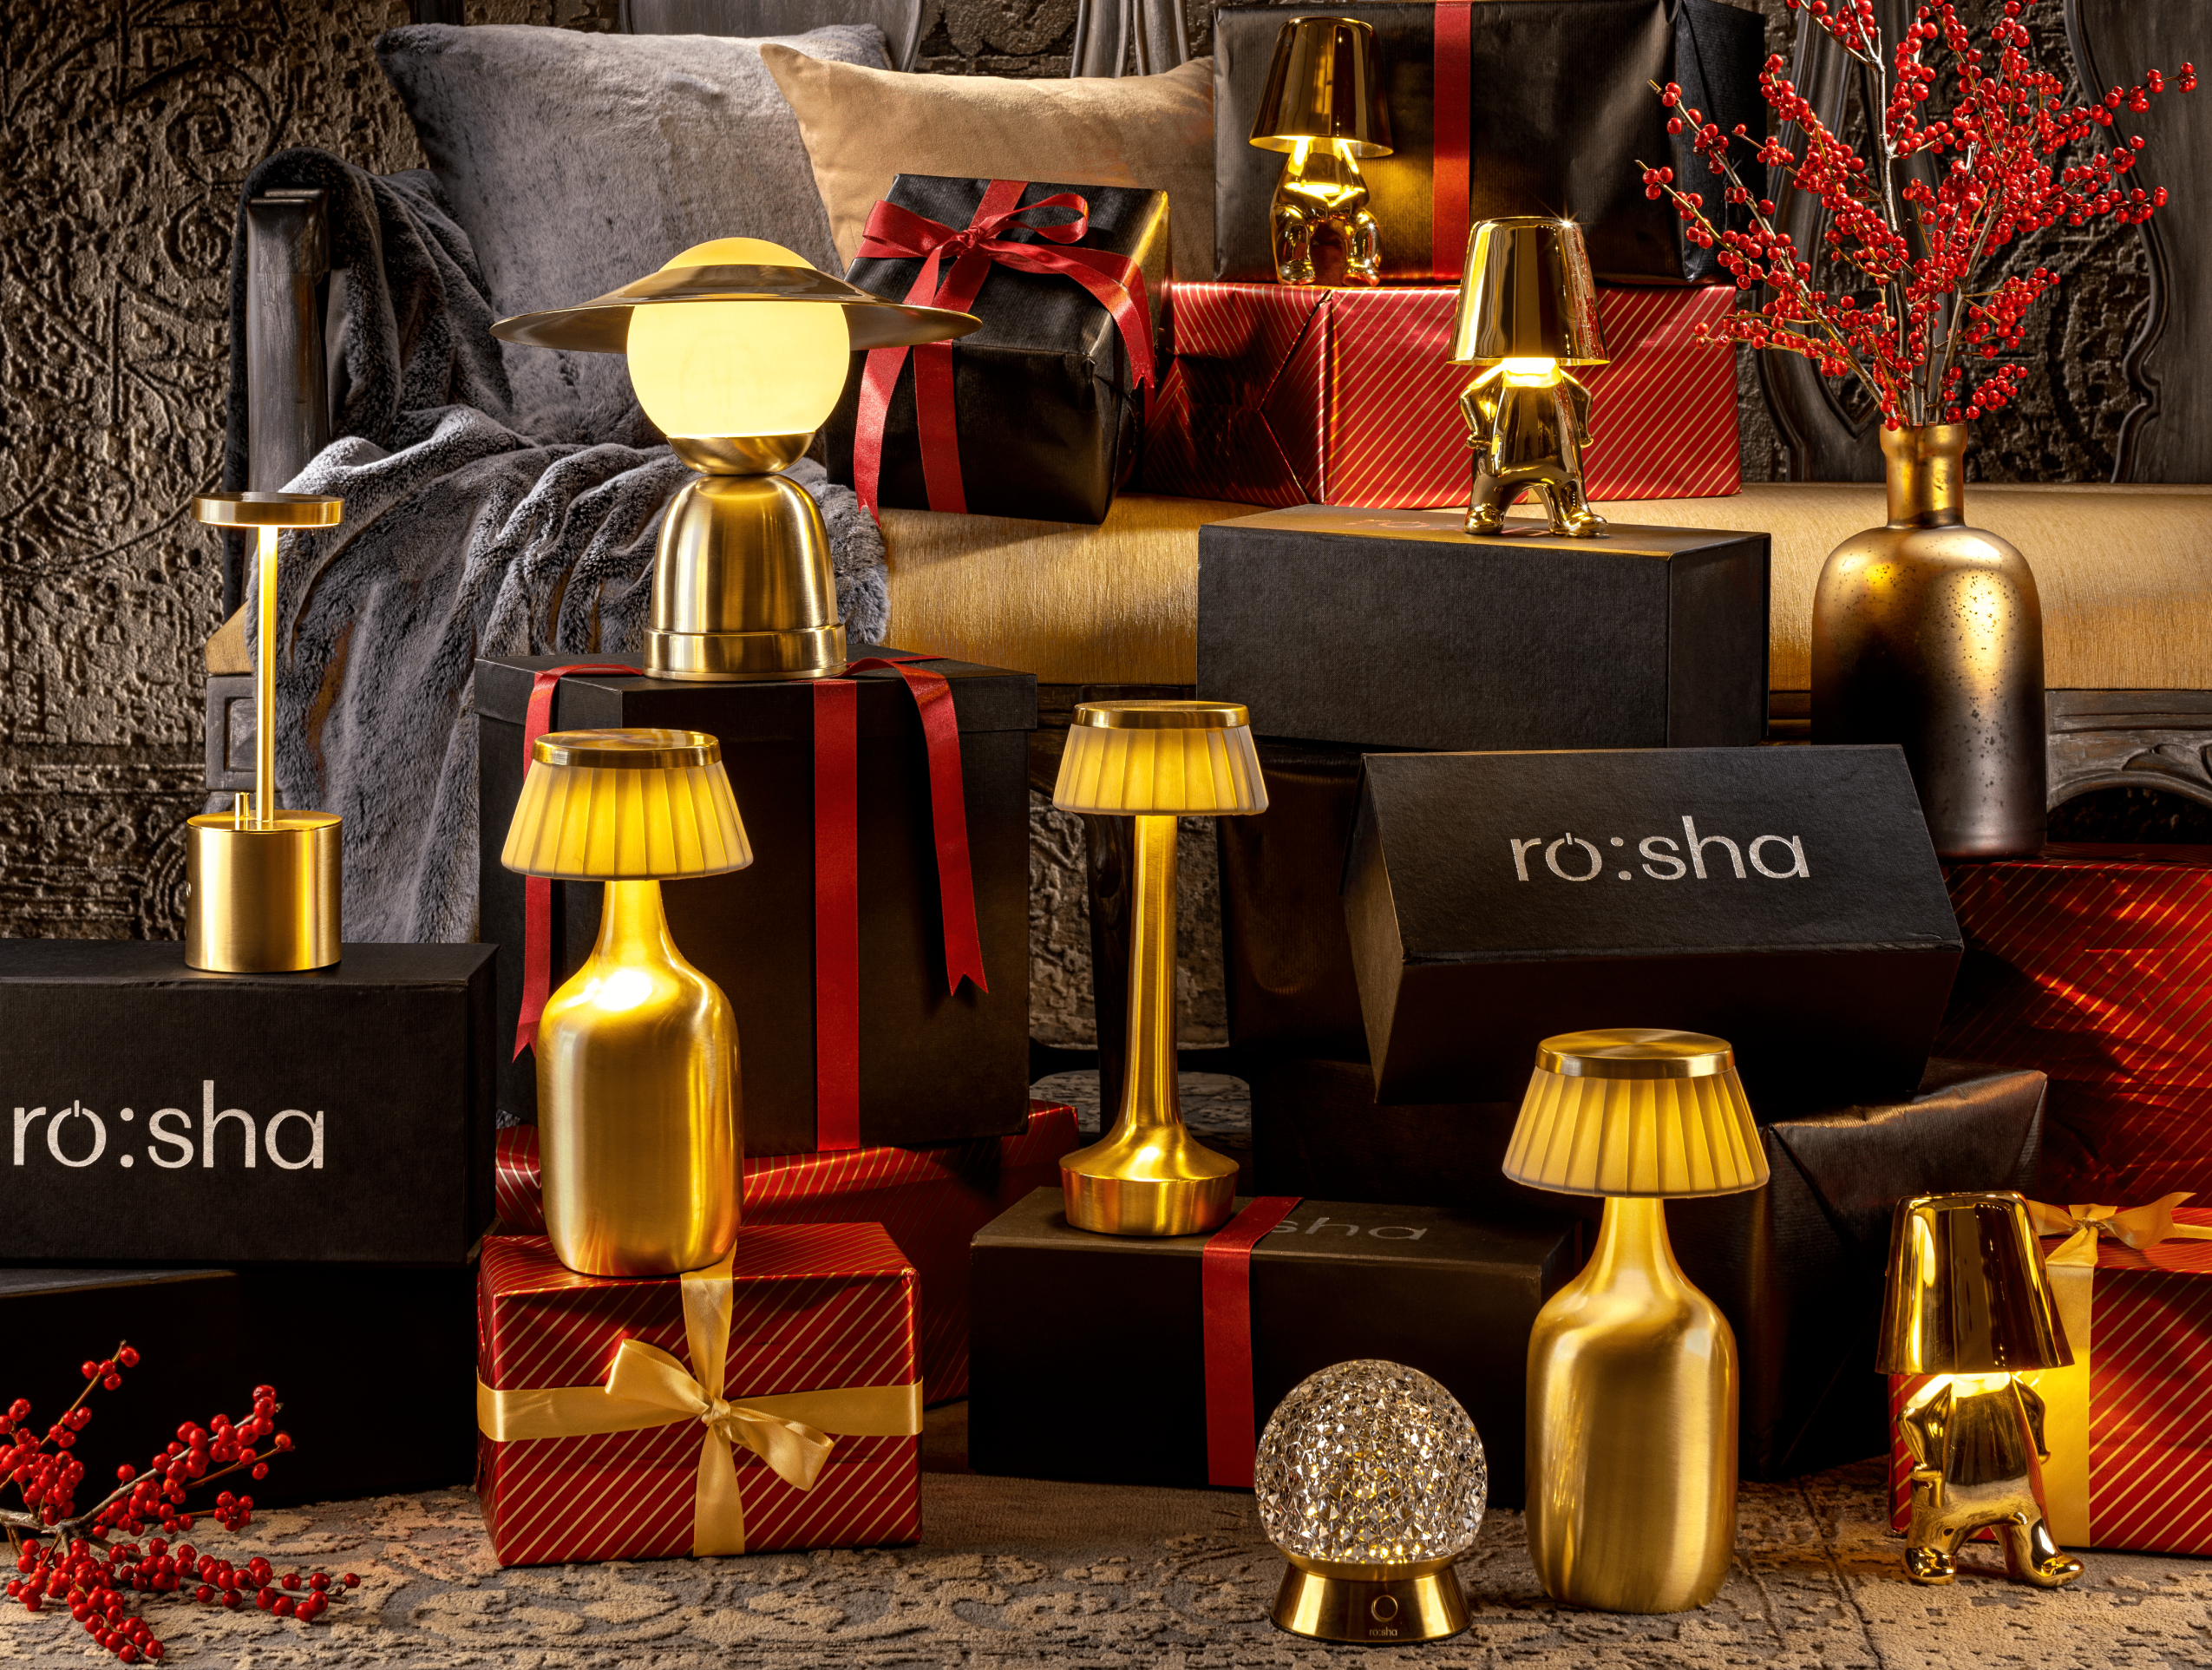 Best-Selling Rosha Lamps To Check Out